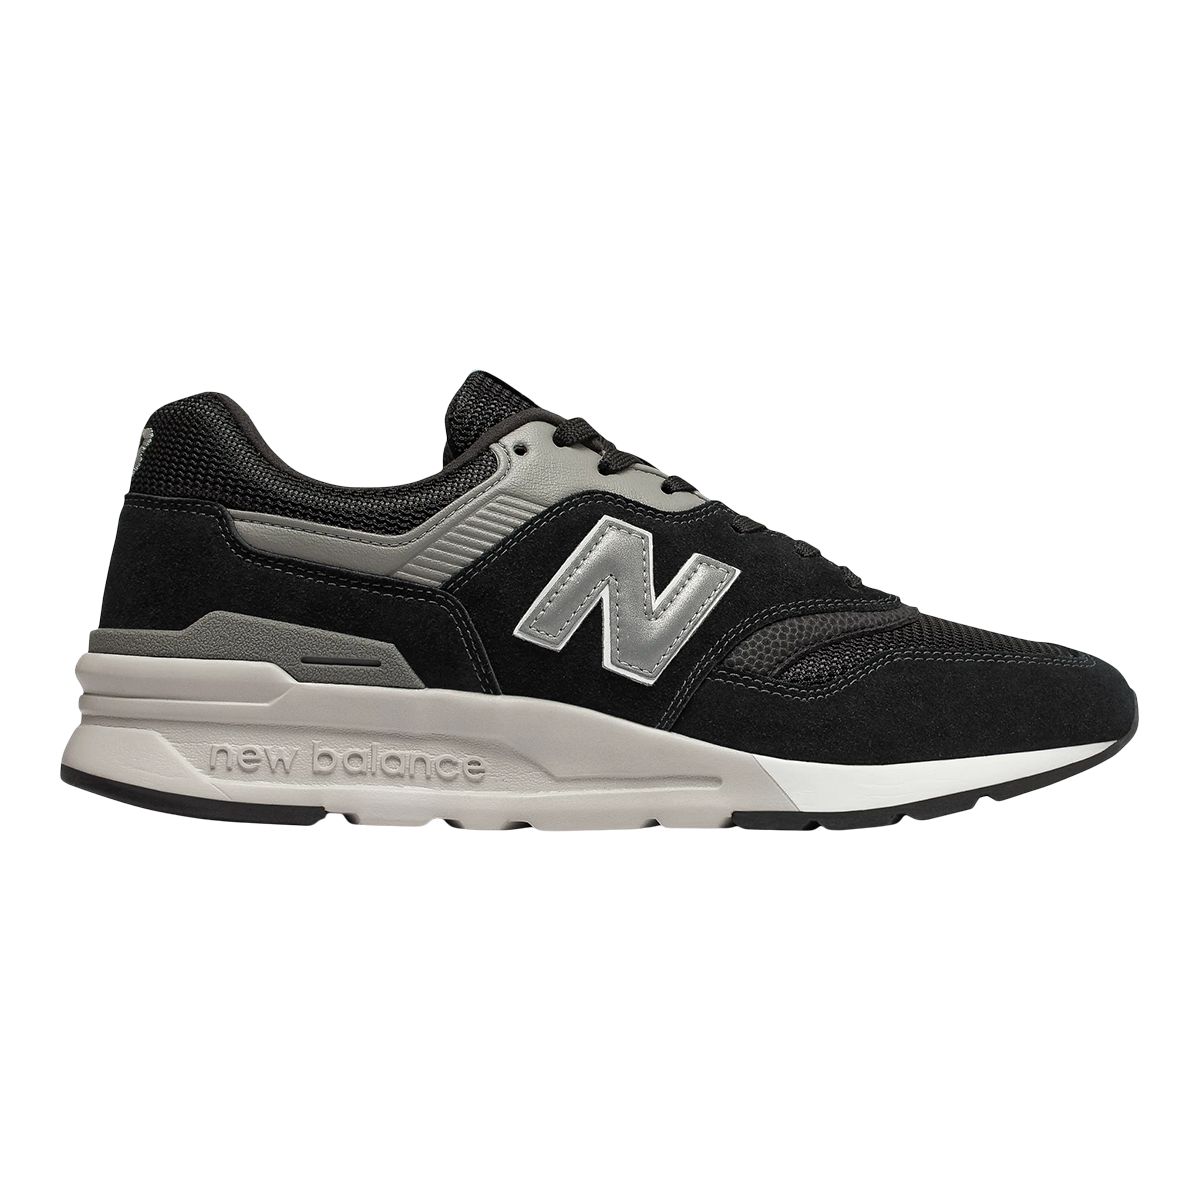 Image of New Balance Men's 997H Shoes